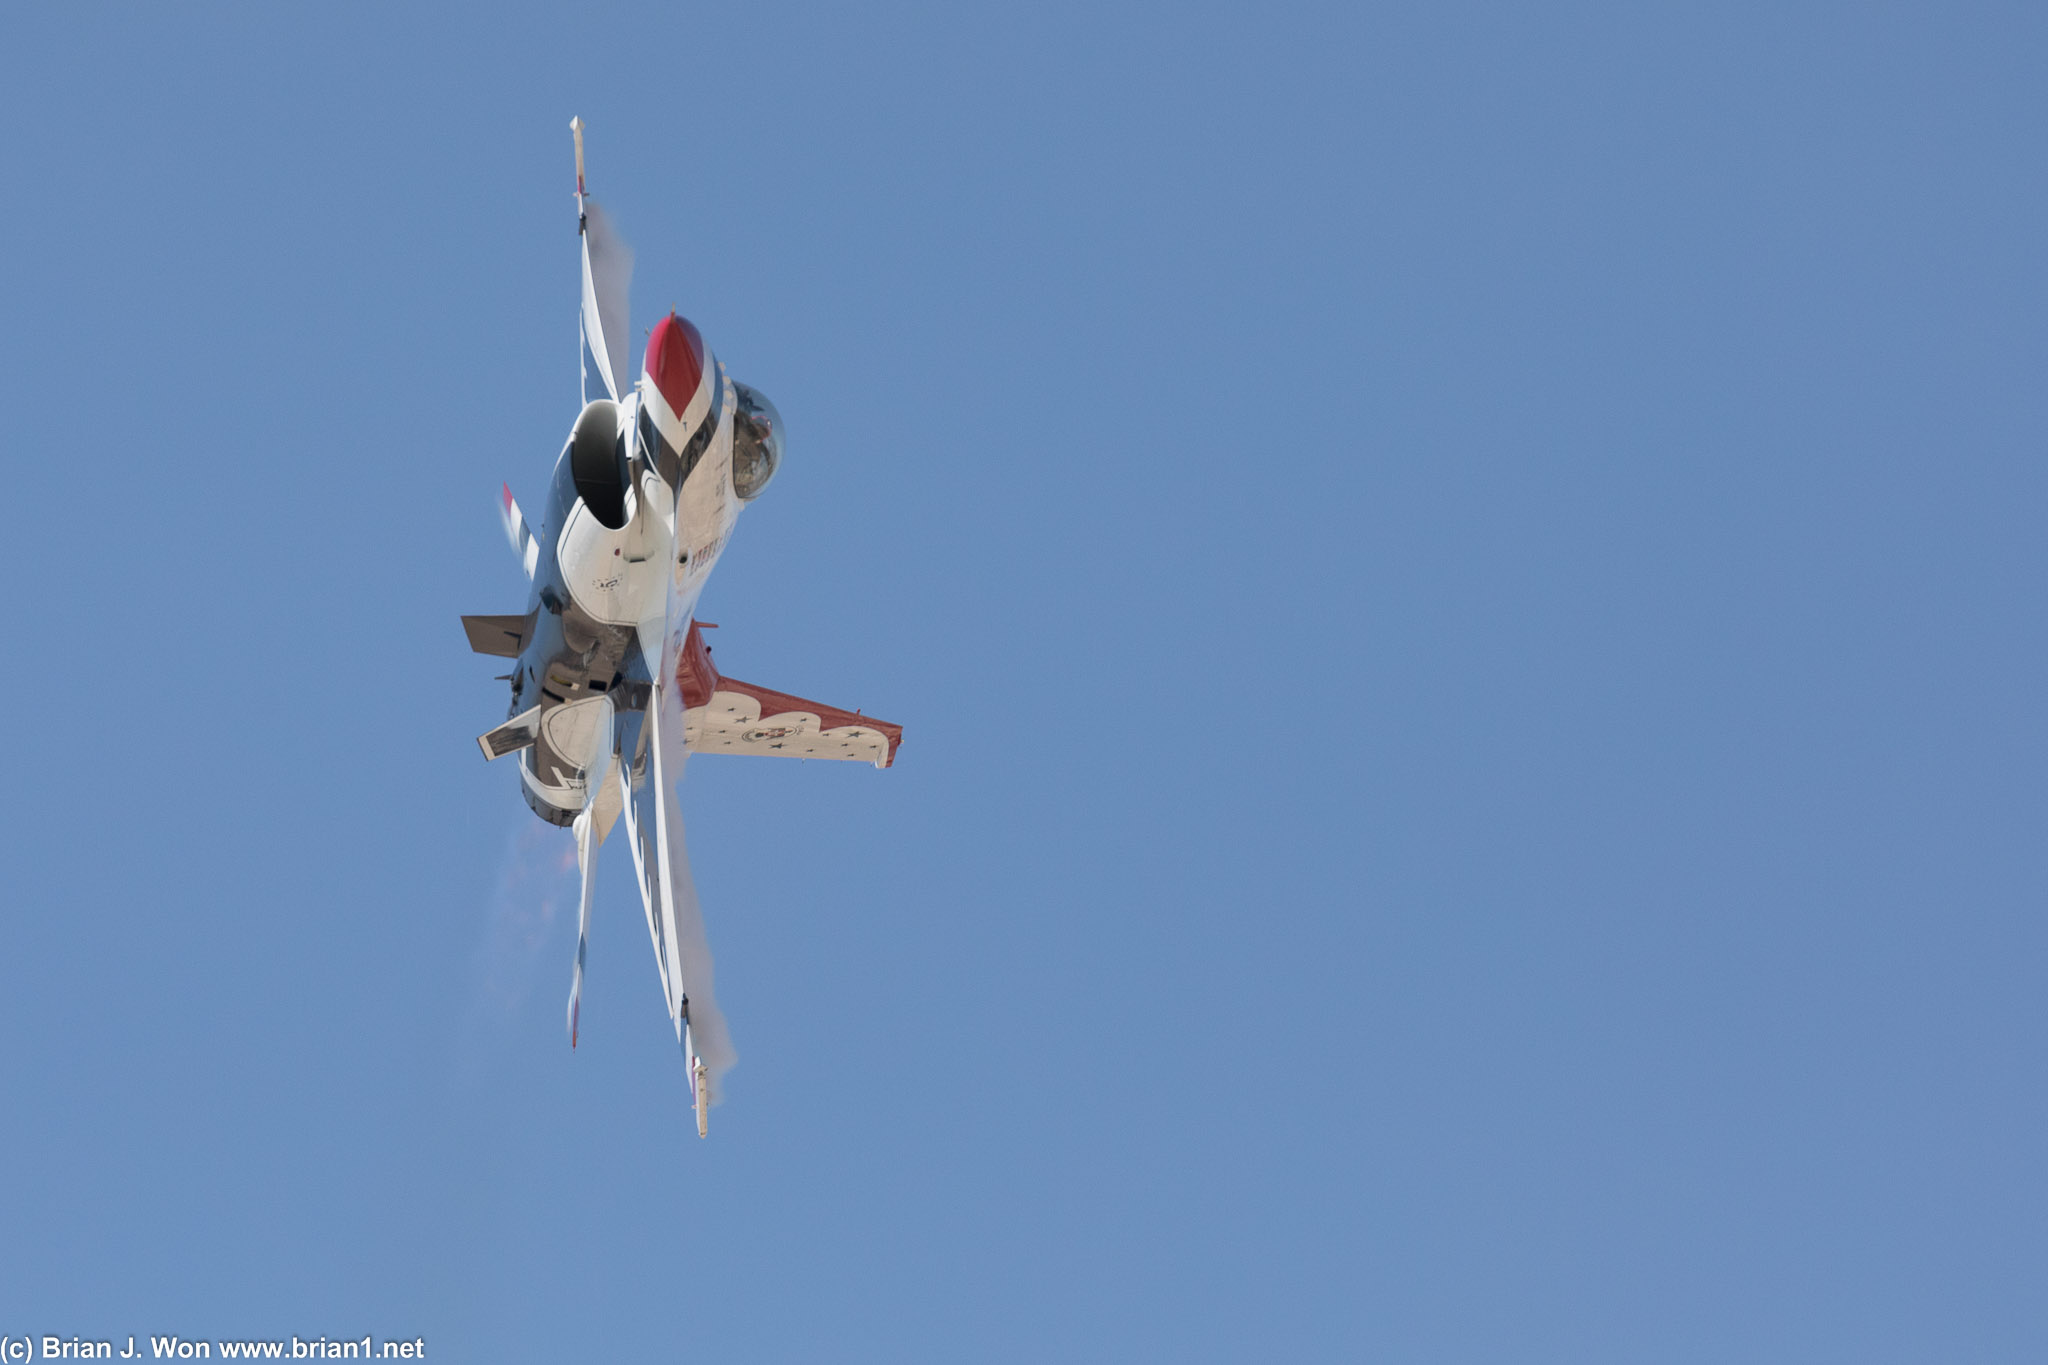 Being directly under a F-16 at afterburner is one hell of an experience.